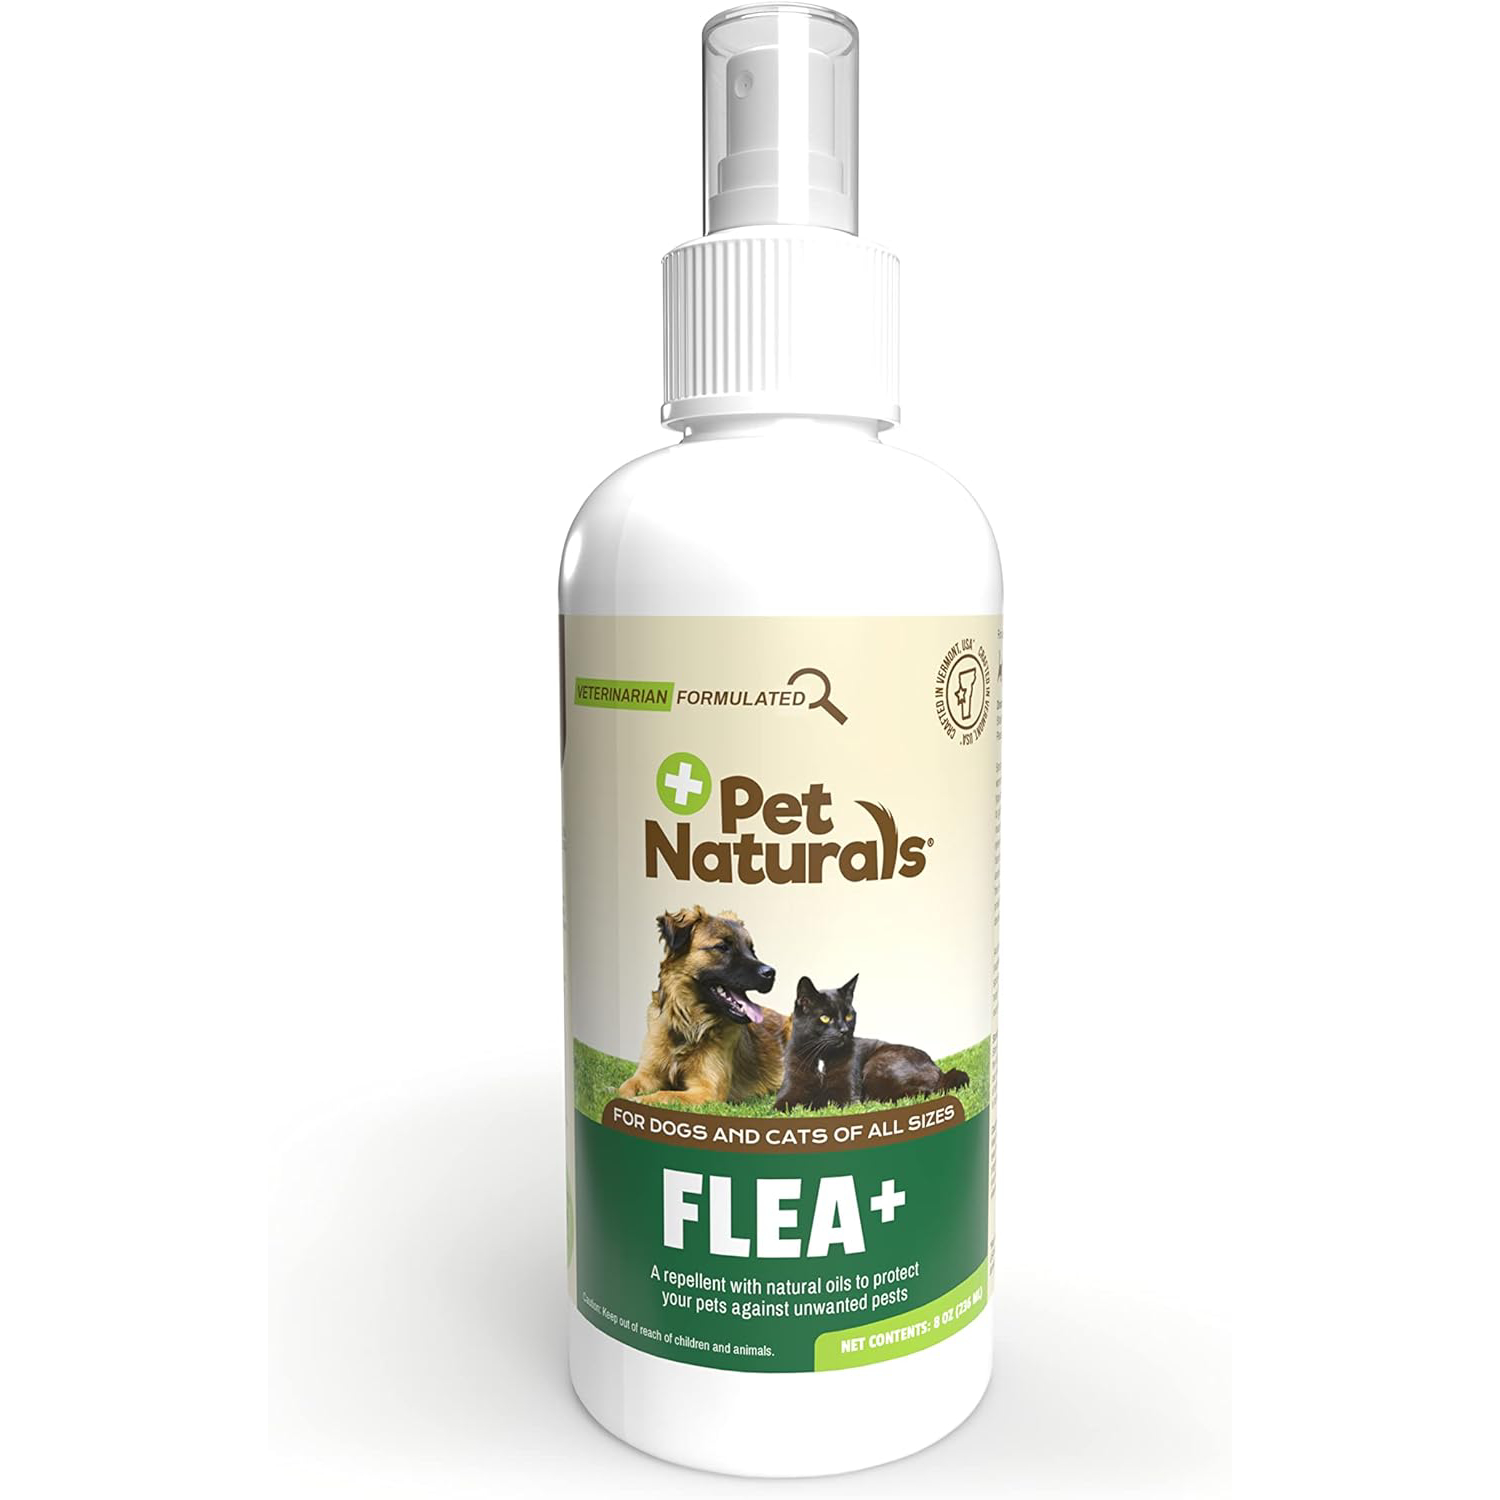 Pet Naturals Flea and Tick Prevention Spray with Natural Oils for Dogs and Cats